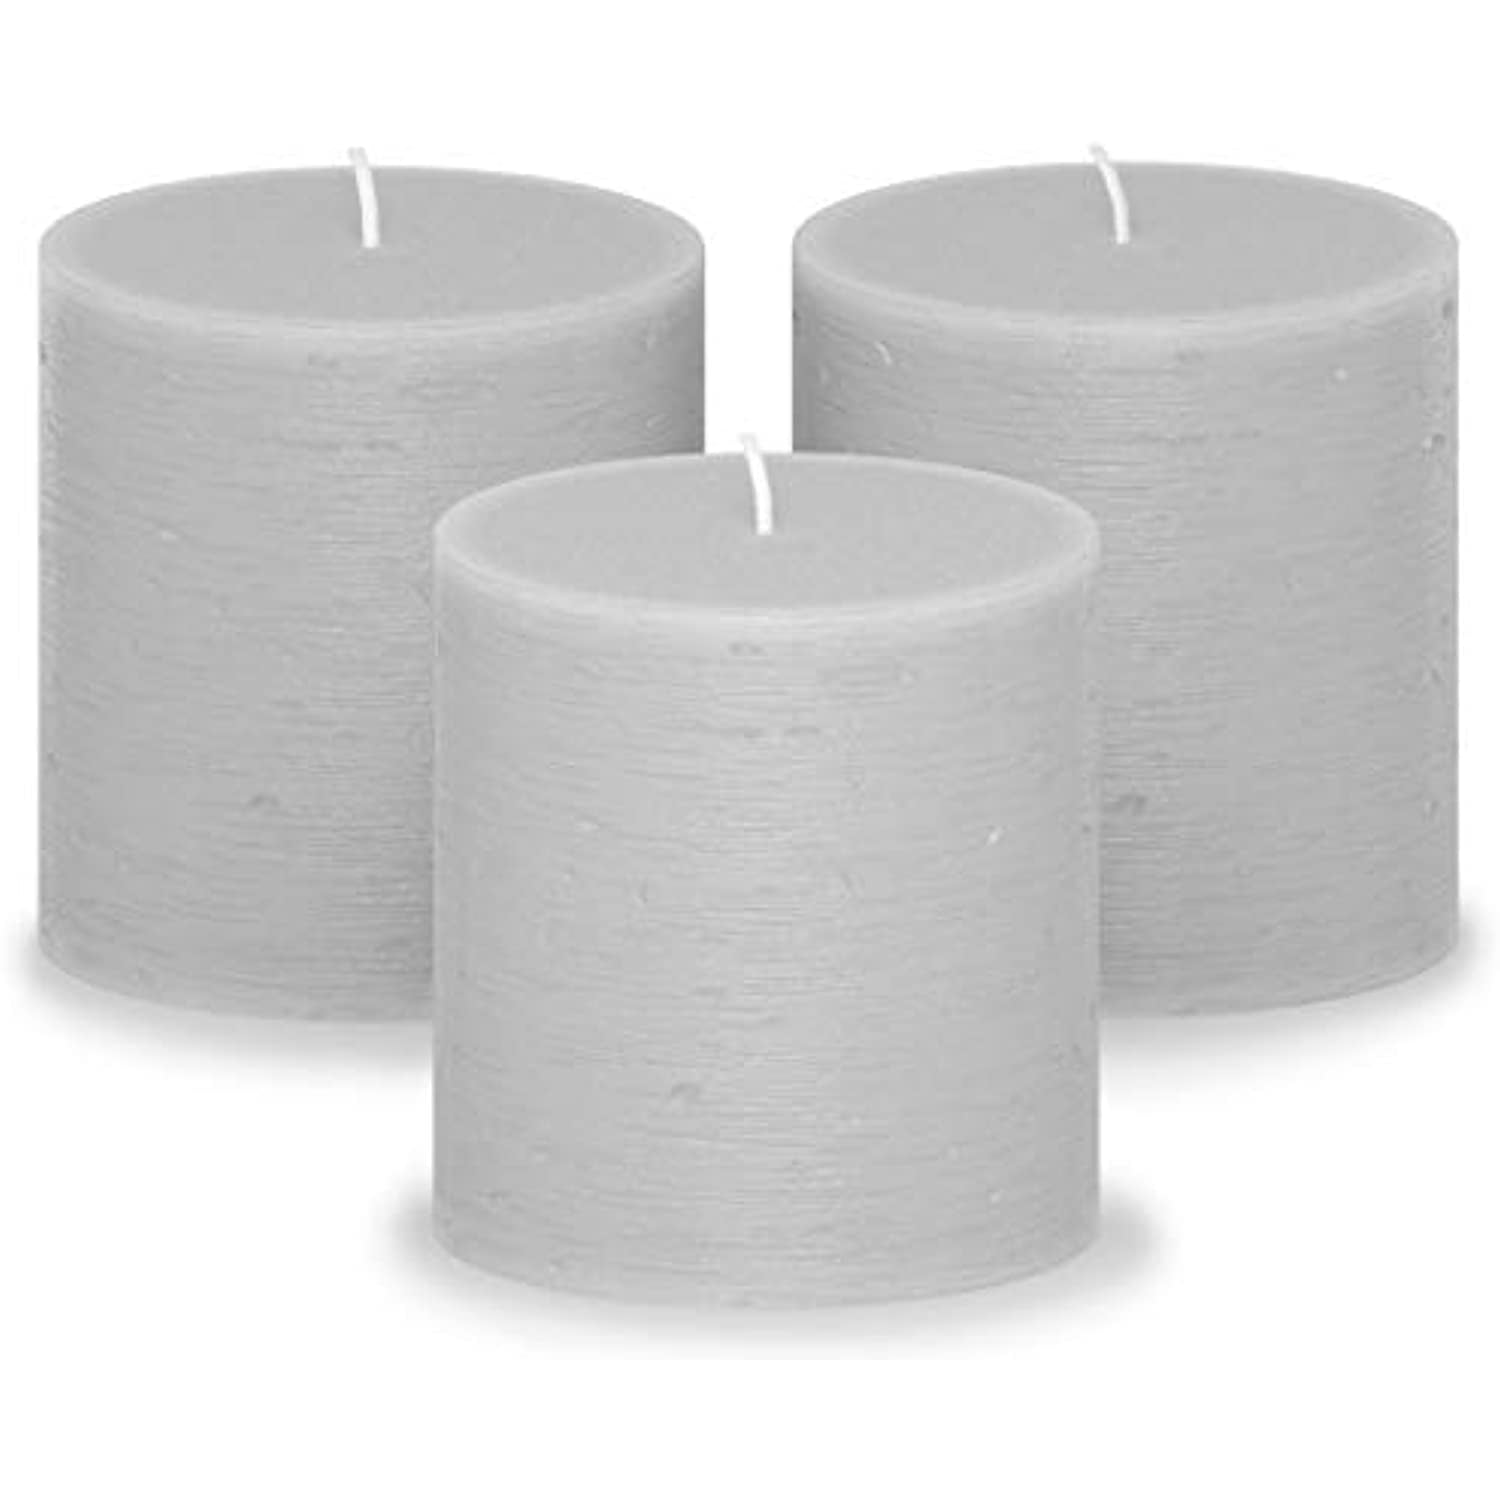 CANDWAX Assorted Candles Pillar 4 and 8 Unscented Candles Long Burning Candles Ideal as Wedding Candles and Candles for Home- Silver Candles Set of 3 inch Rustic Pillar Candles Includes 3